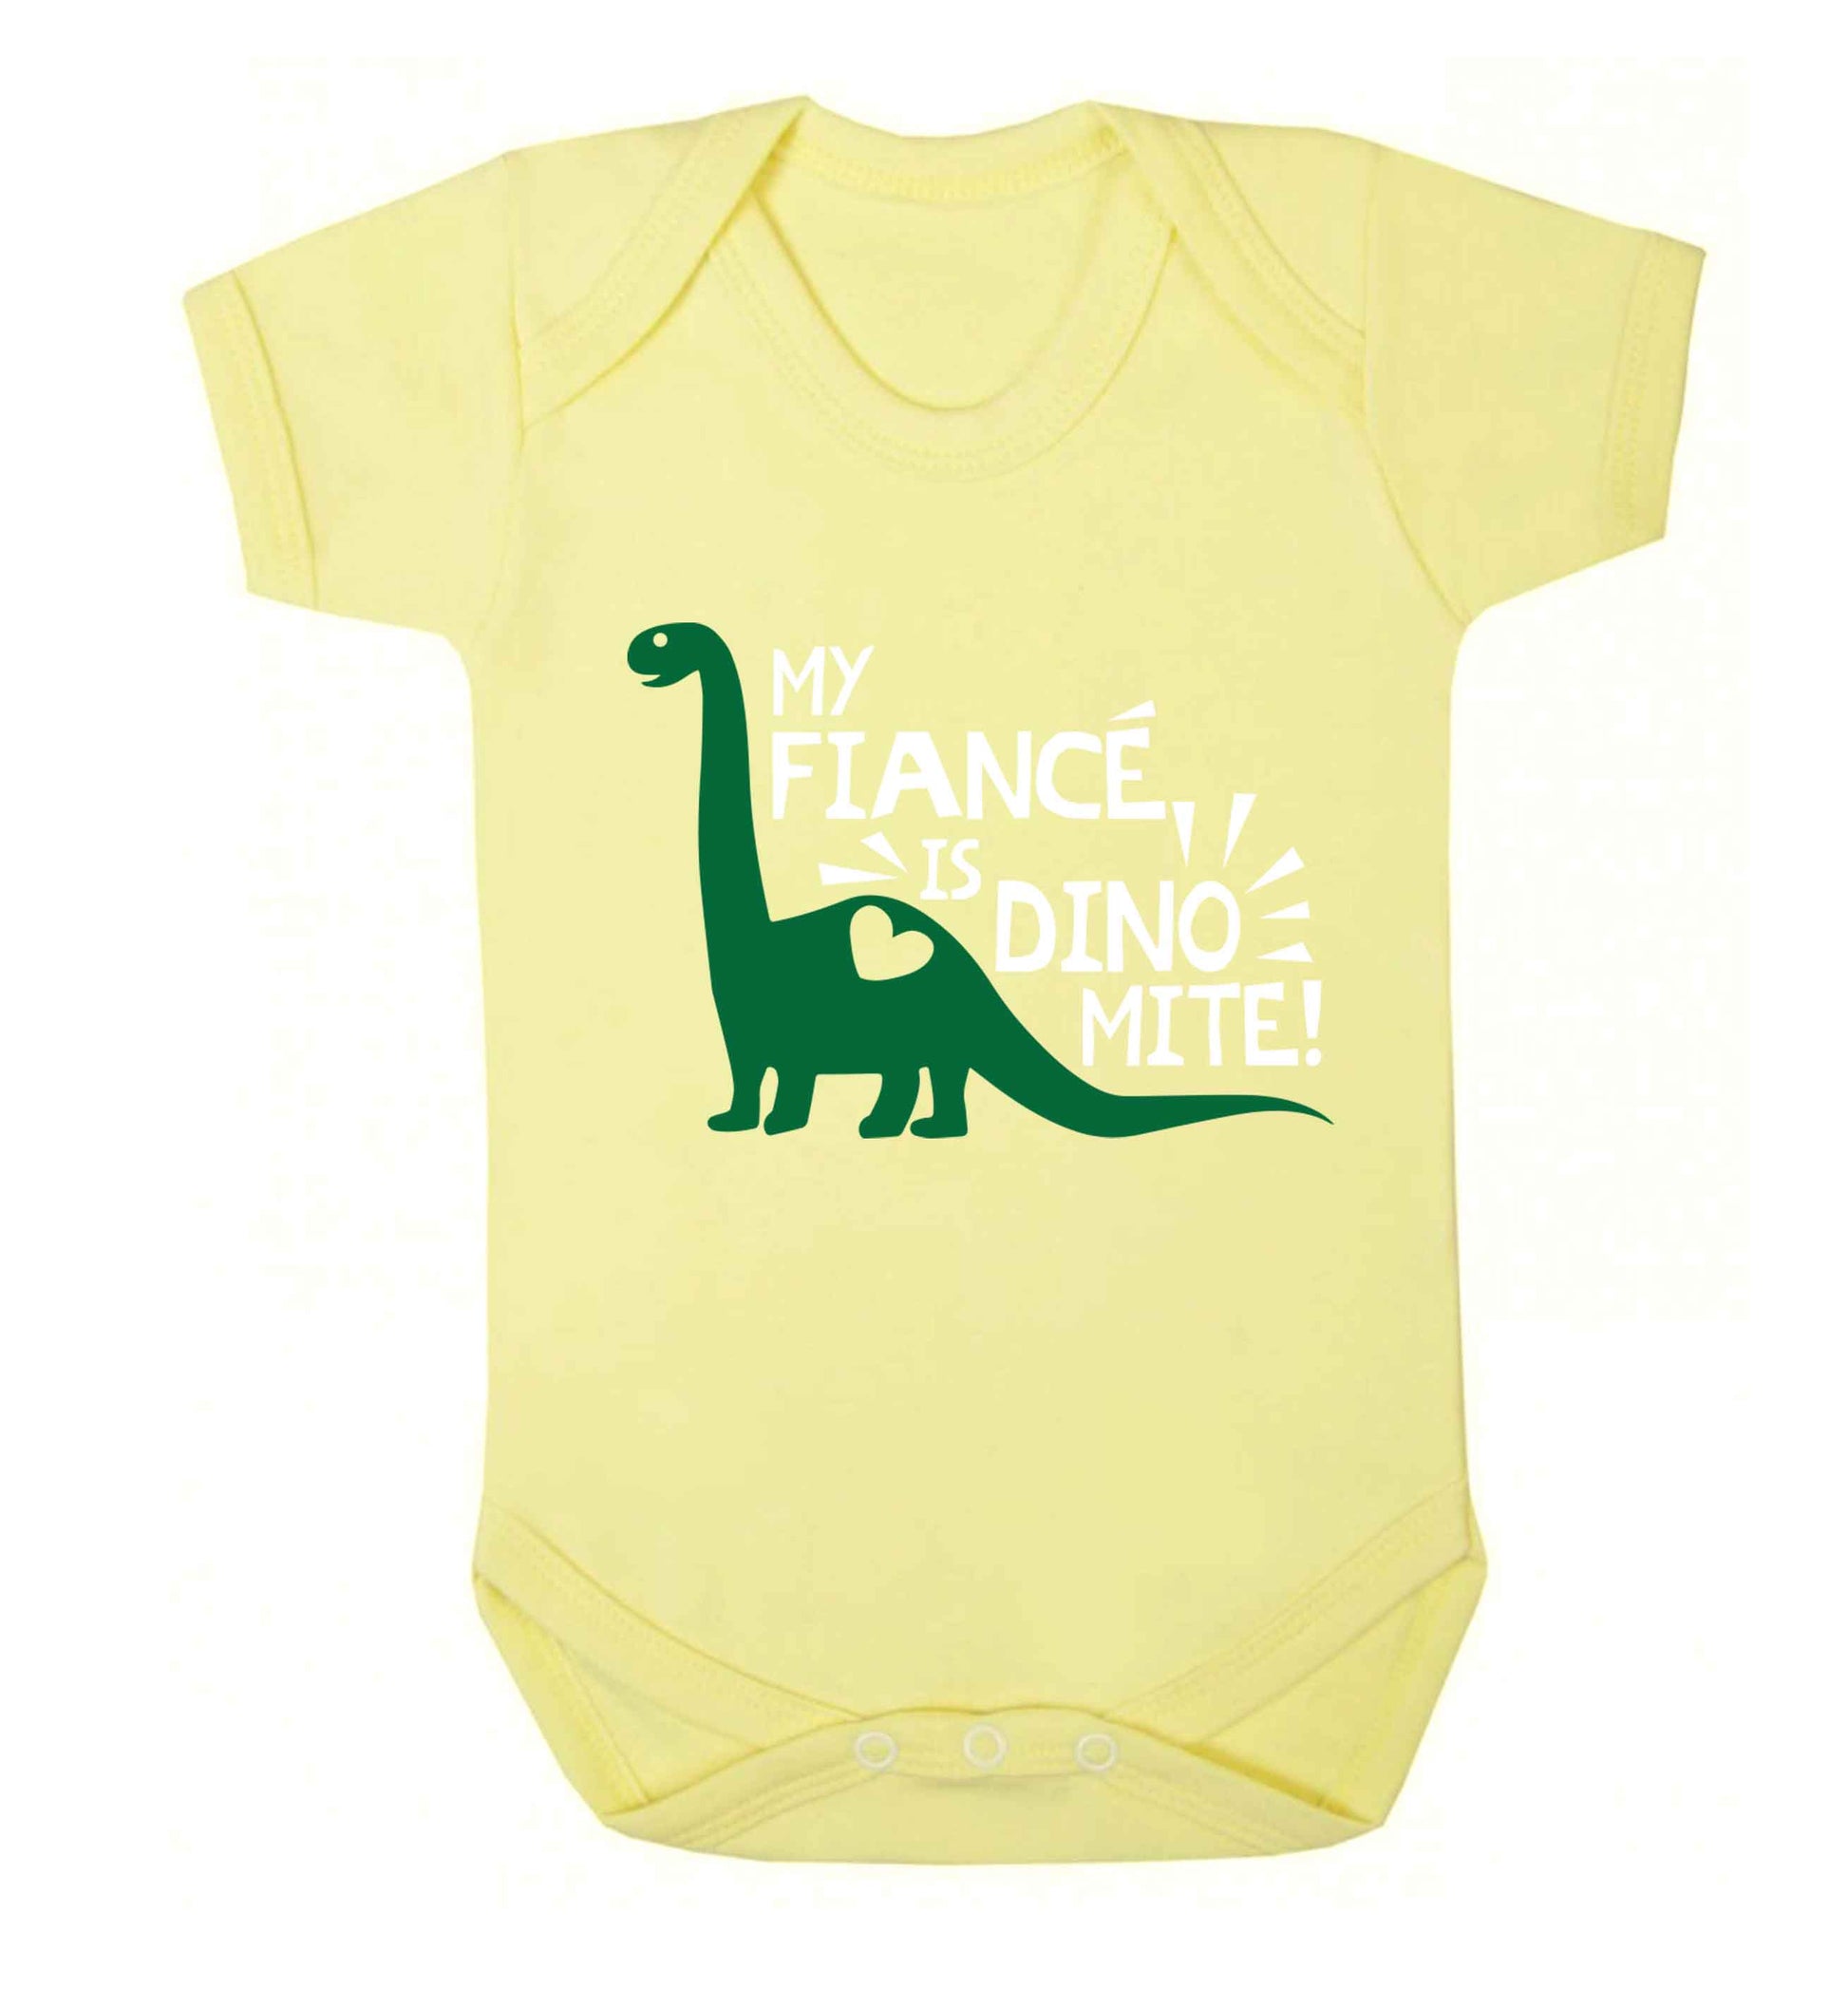 My fiance is dinomite! Baby Vest pale yellow 18-24 months